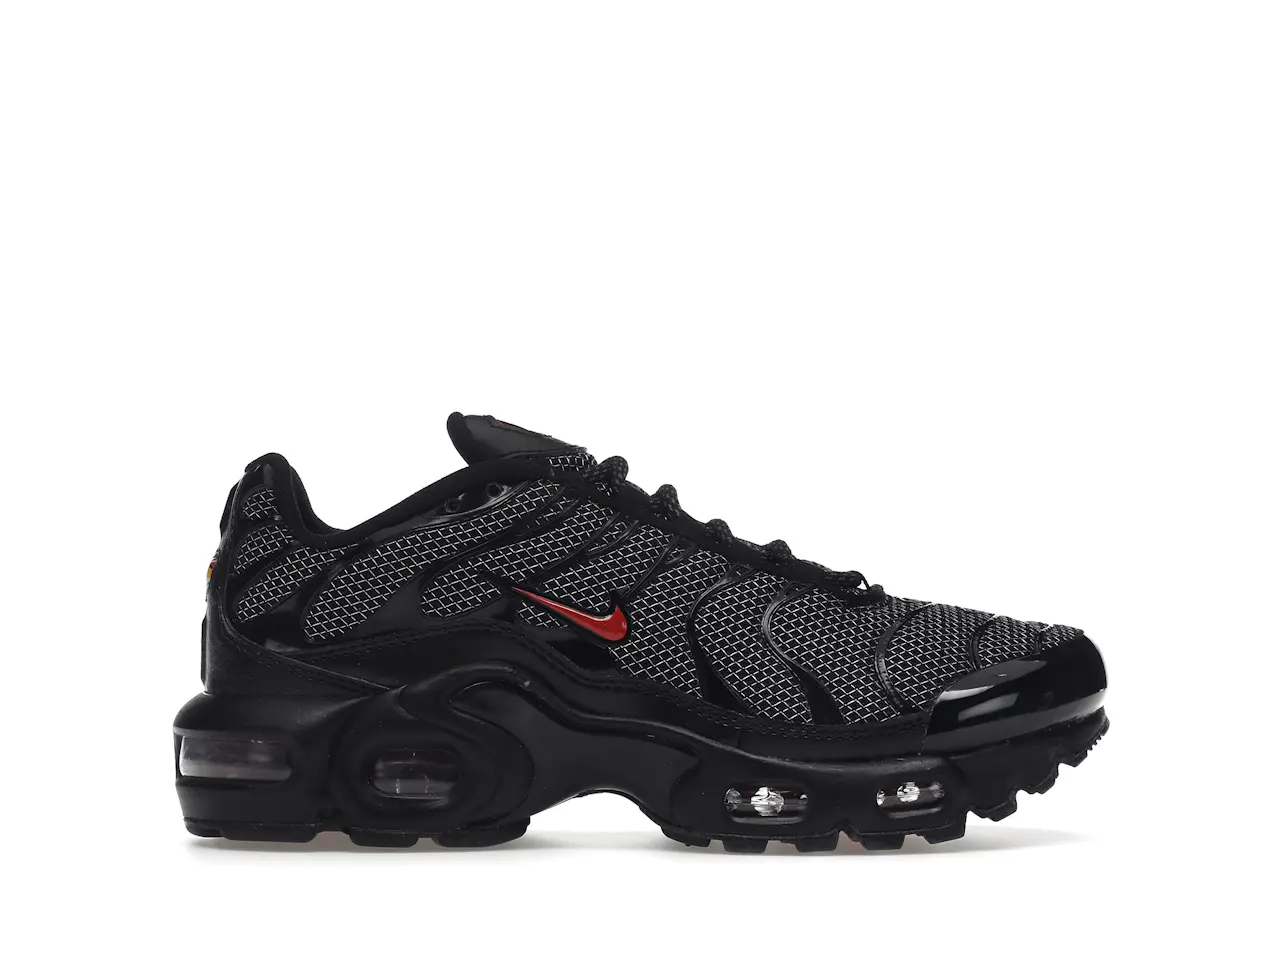 Nike Air Max Plus Black University Red Reflective Silver (GS) Kids ...